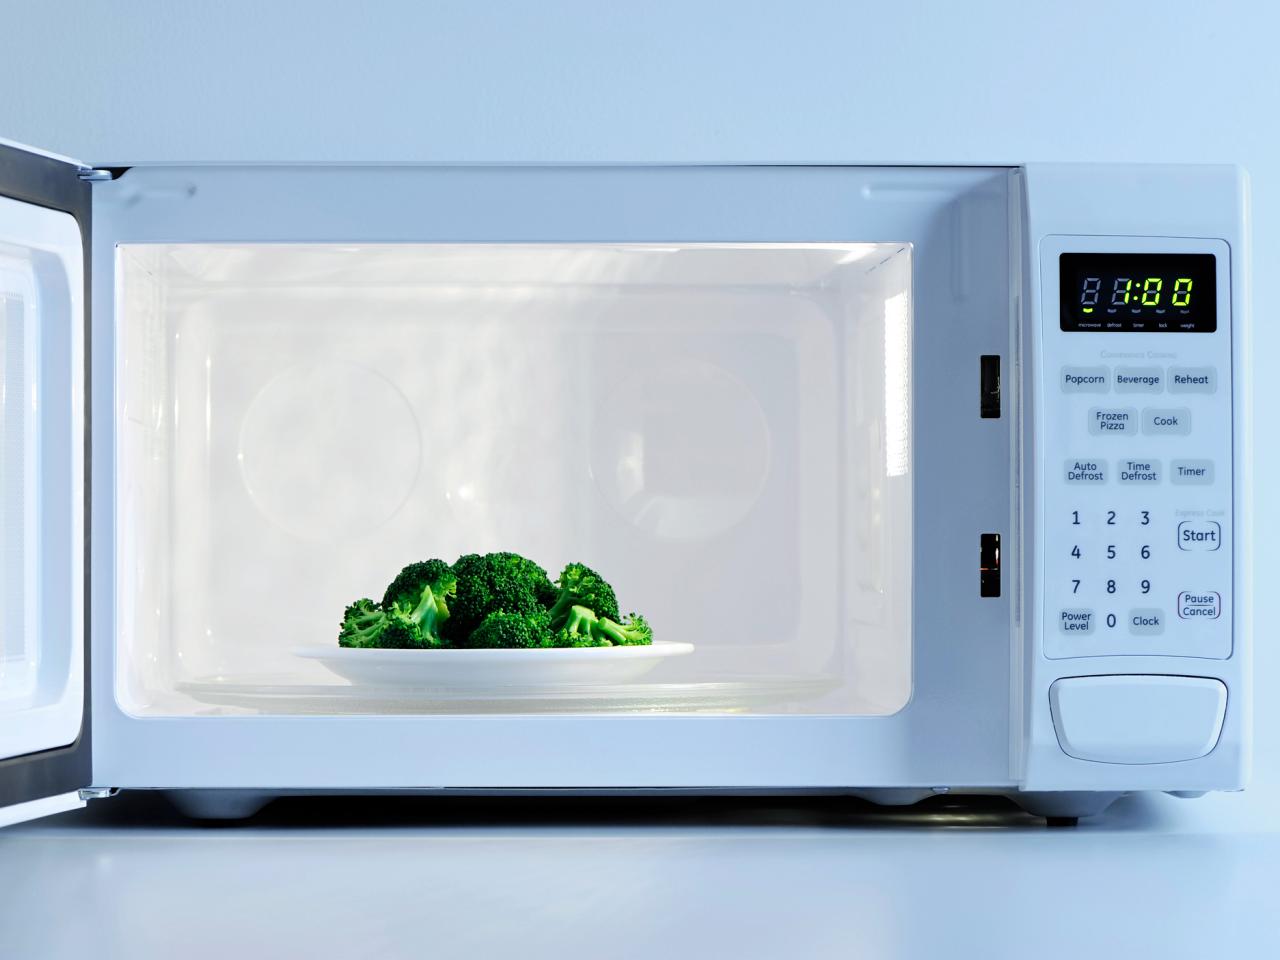 The Best Way to Reheat Leftovers Is Definitely Not in a Microwave - CNET